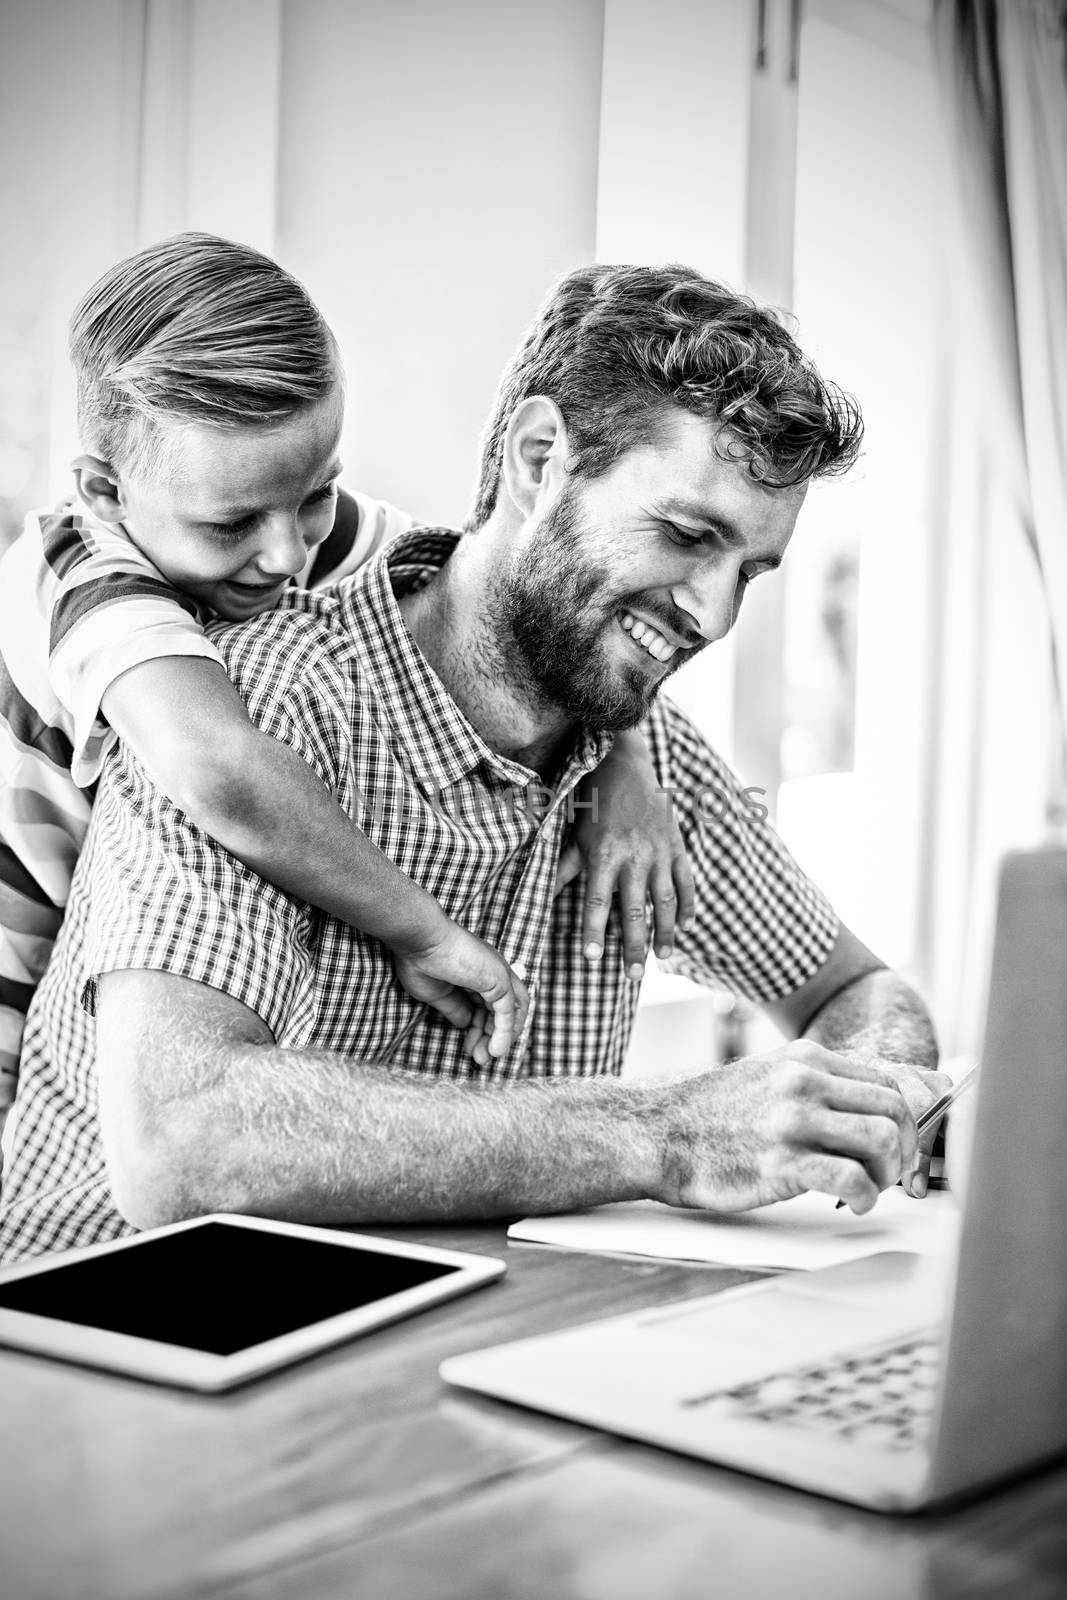 Smiling son leaning on father working at home  by Wavebreakmedia